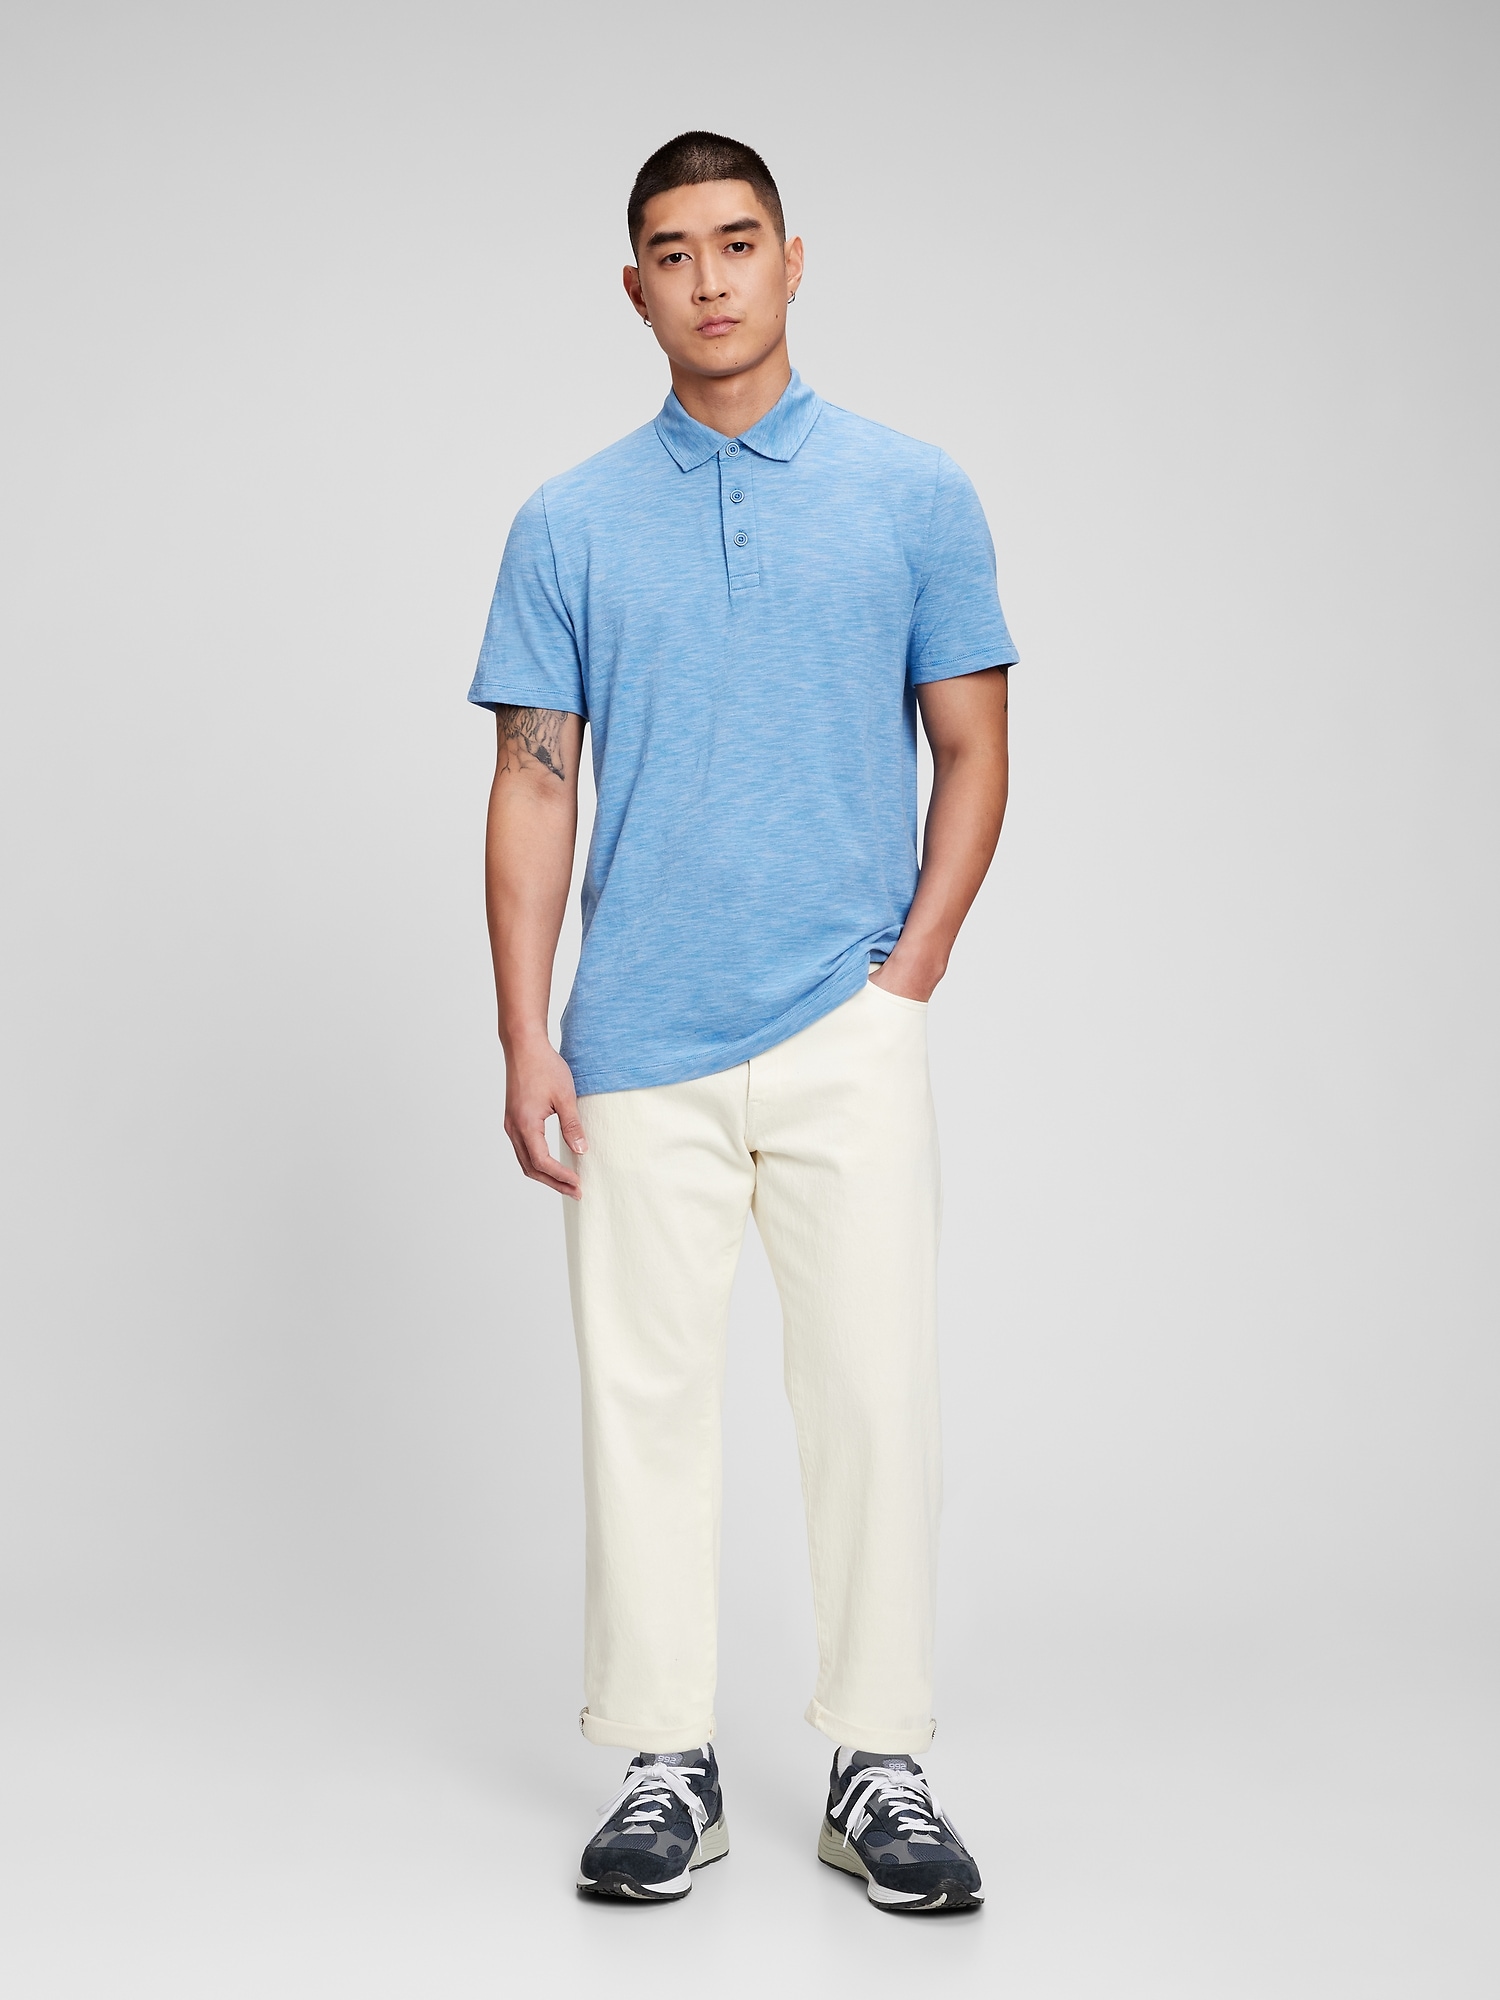 Polo Factory Lived-In Shirt | Gap